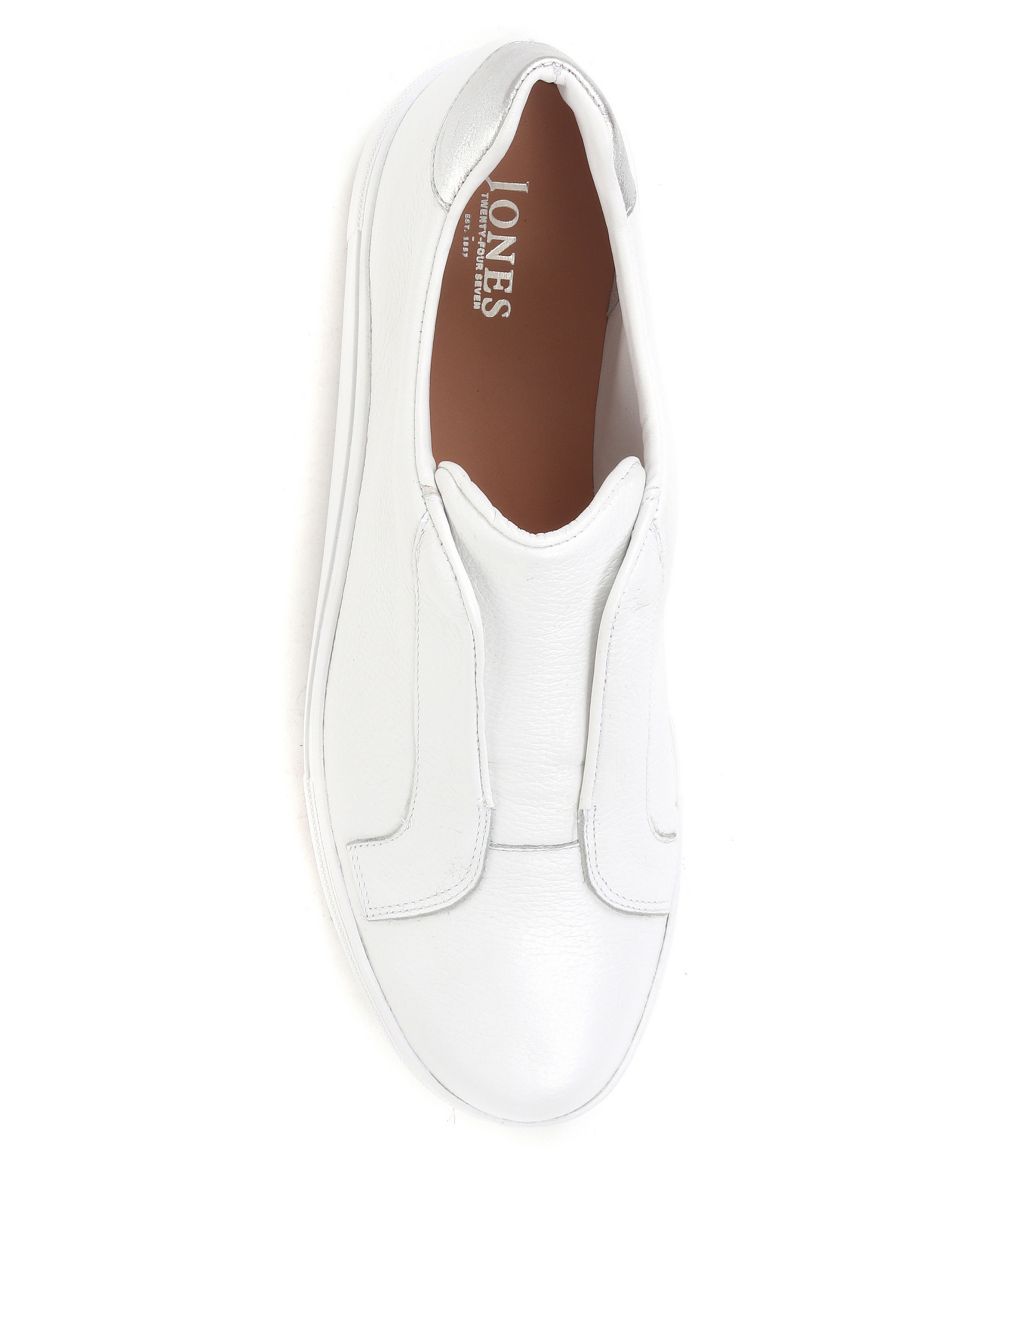 Leather Slip On Trainers image 2